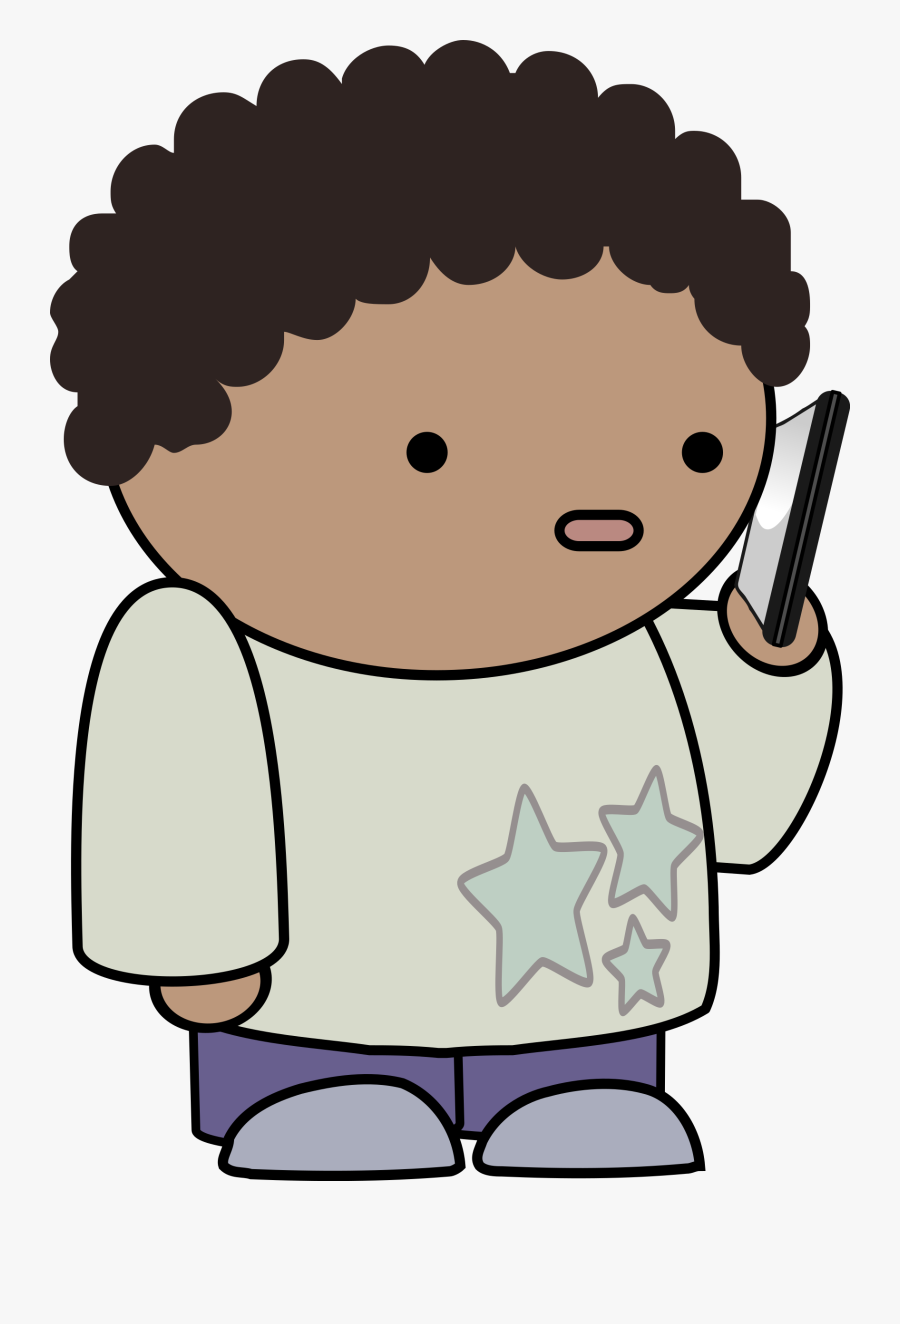 Big Image Png - Clipart Talking On The Phone, Transparent Clipart